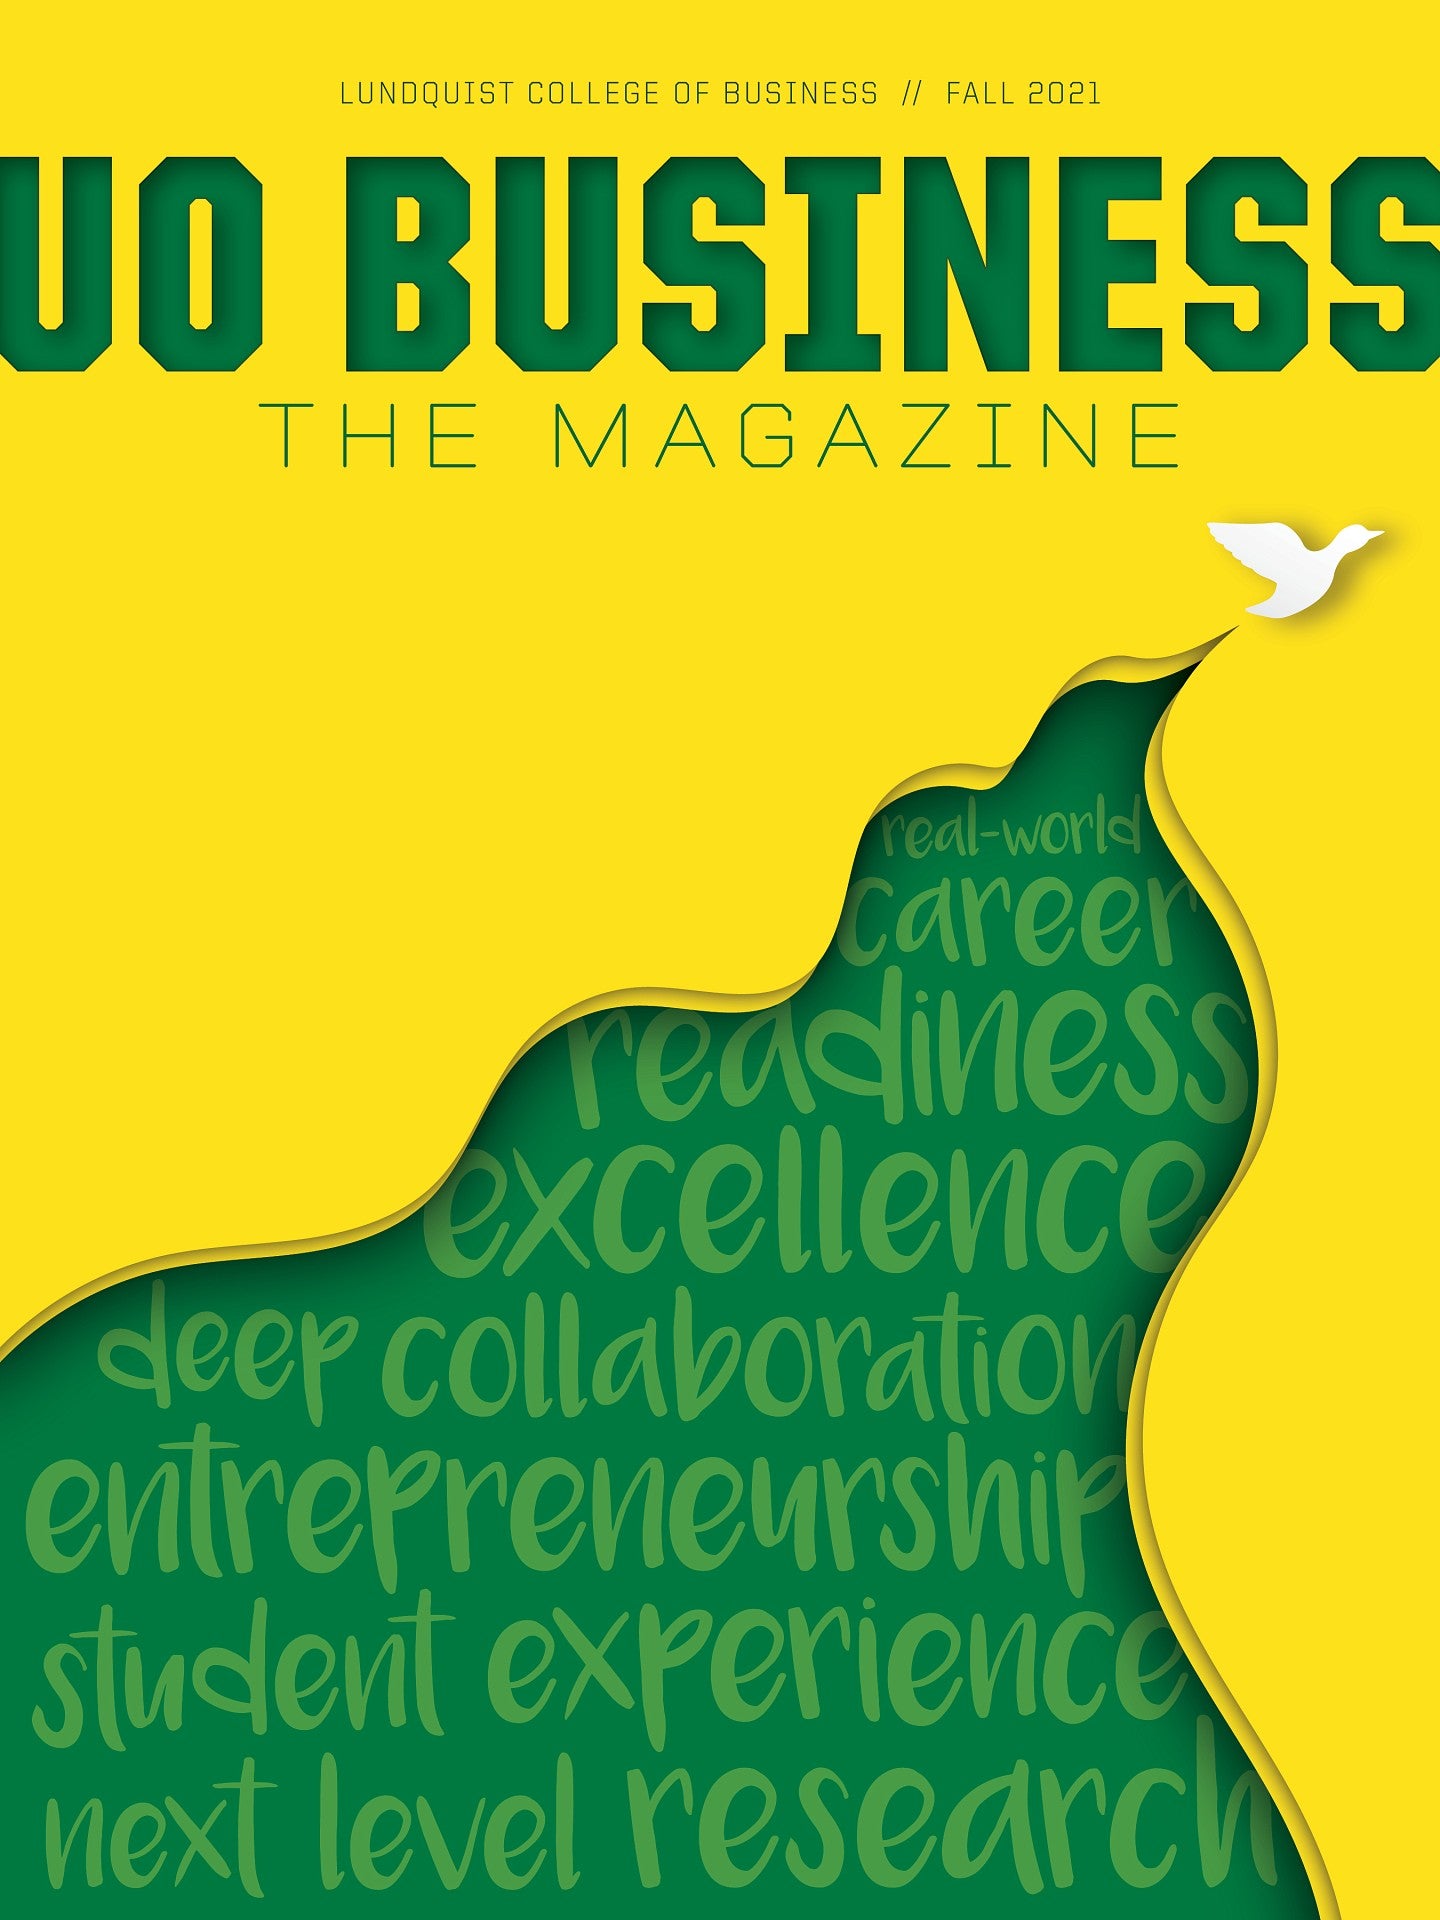 The cover art for UO Business: The Magazine: A white icon of a duck flies against a yellow background, its flight path appears to unveil a green background with phrases pertaining to the Lundquist College